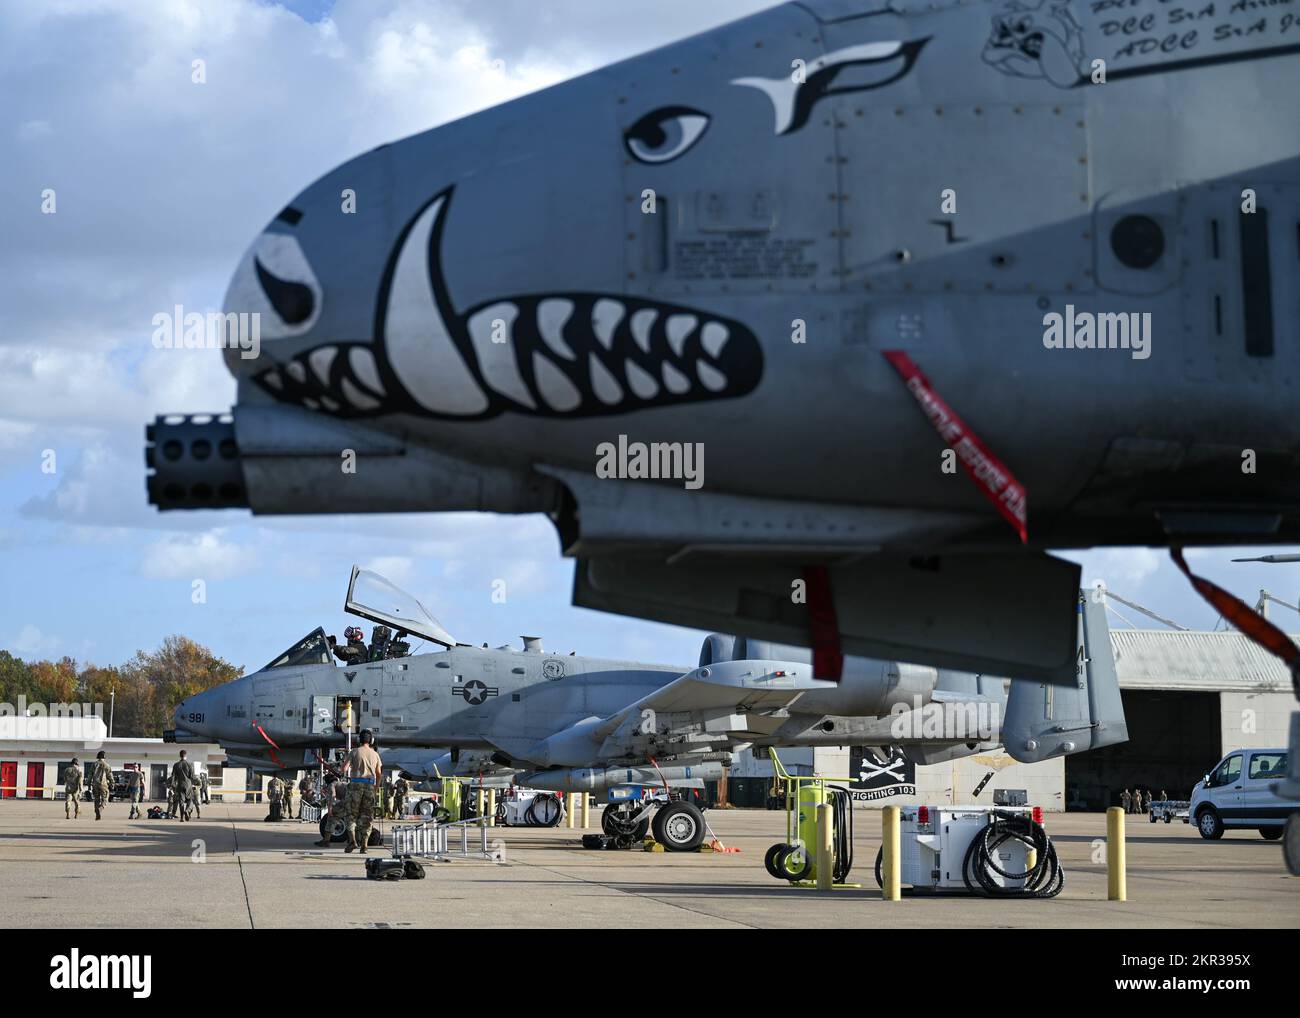 A-10 Thunderbolt IIs from the 354th Fighter Squadron at Davis-Monthan Air Force Base sit on the flightline at Naval Air Station Oceana, Virginia, during Bushwhacker 22-07, Nov. 3, 2022. This operational training was a part of the Lead Wing certification process and allowed DM to prepare for the final certification exercise projected to take place in 2023. (U.S. Air Force photo by Airman 1st Class Paige Weldon) Stock Photo